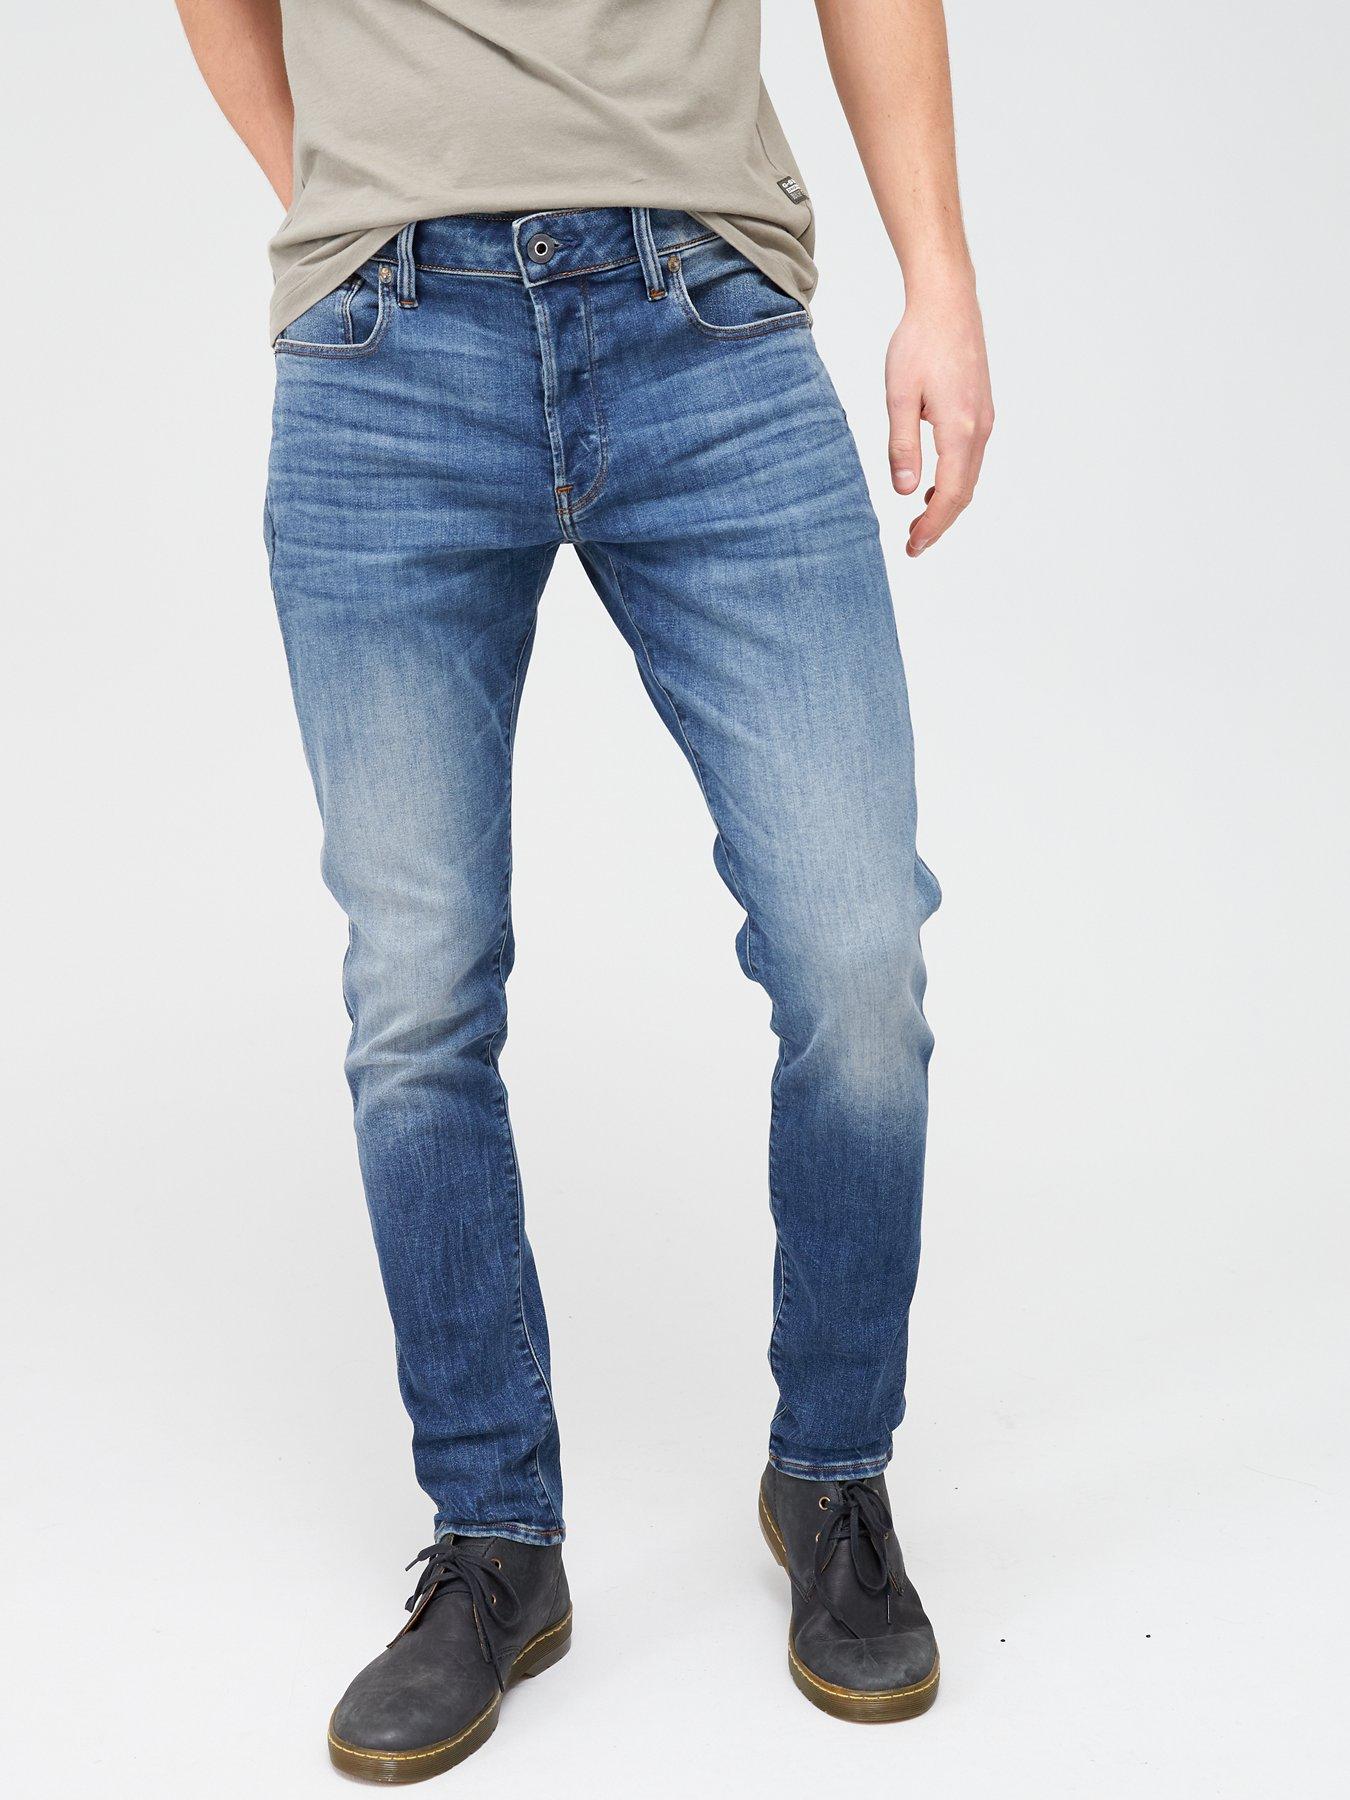 Mens Jeans G-Star RAW Jeans G-Star RAW Denim Jeans in Blue for Men 